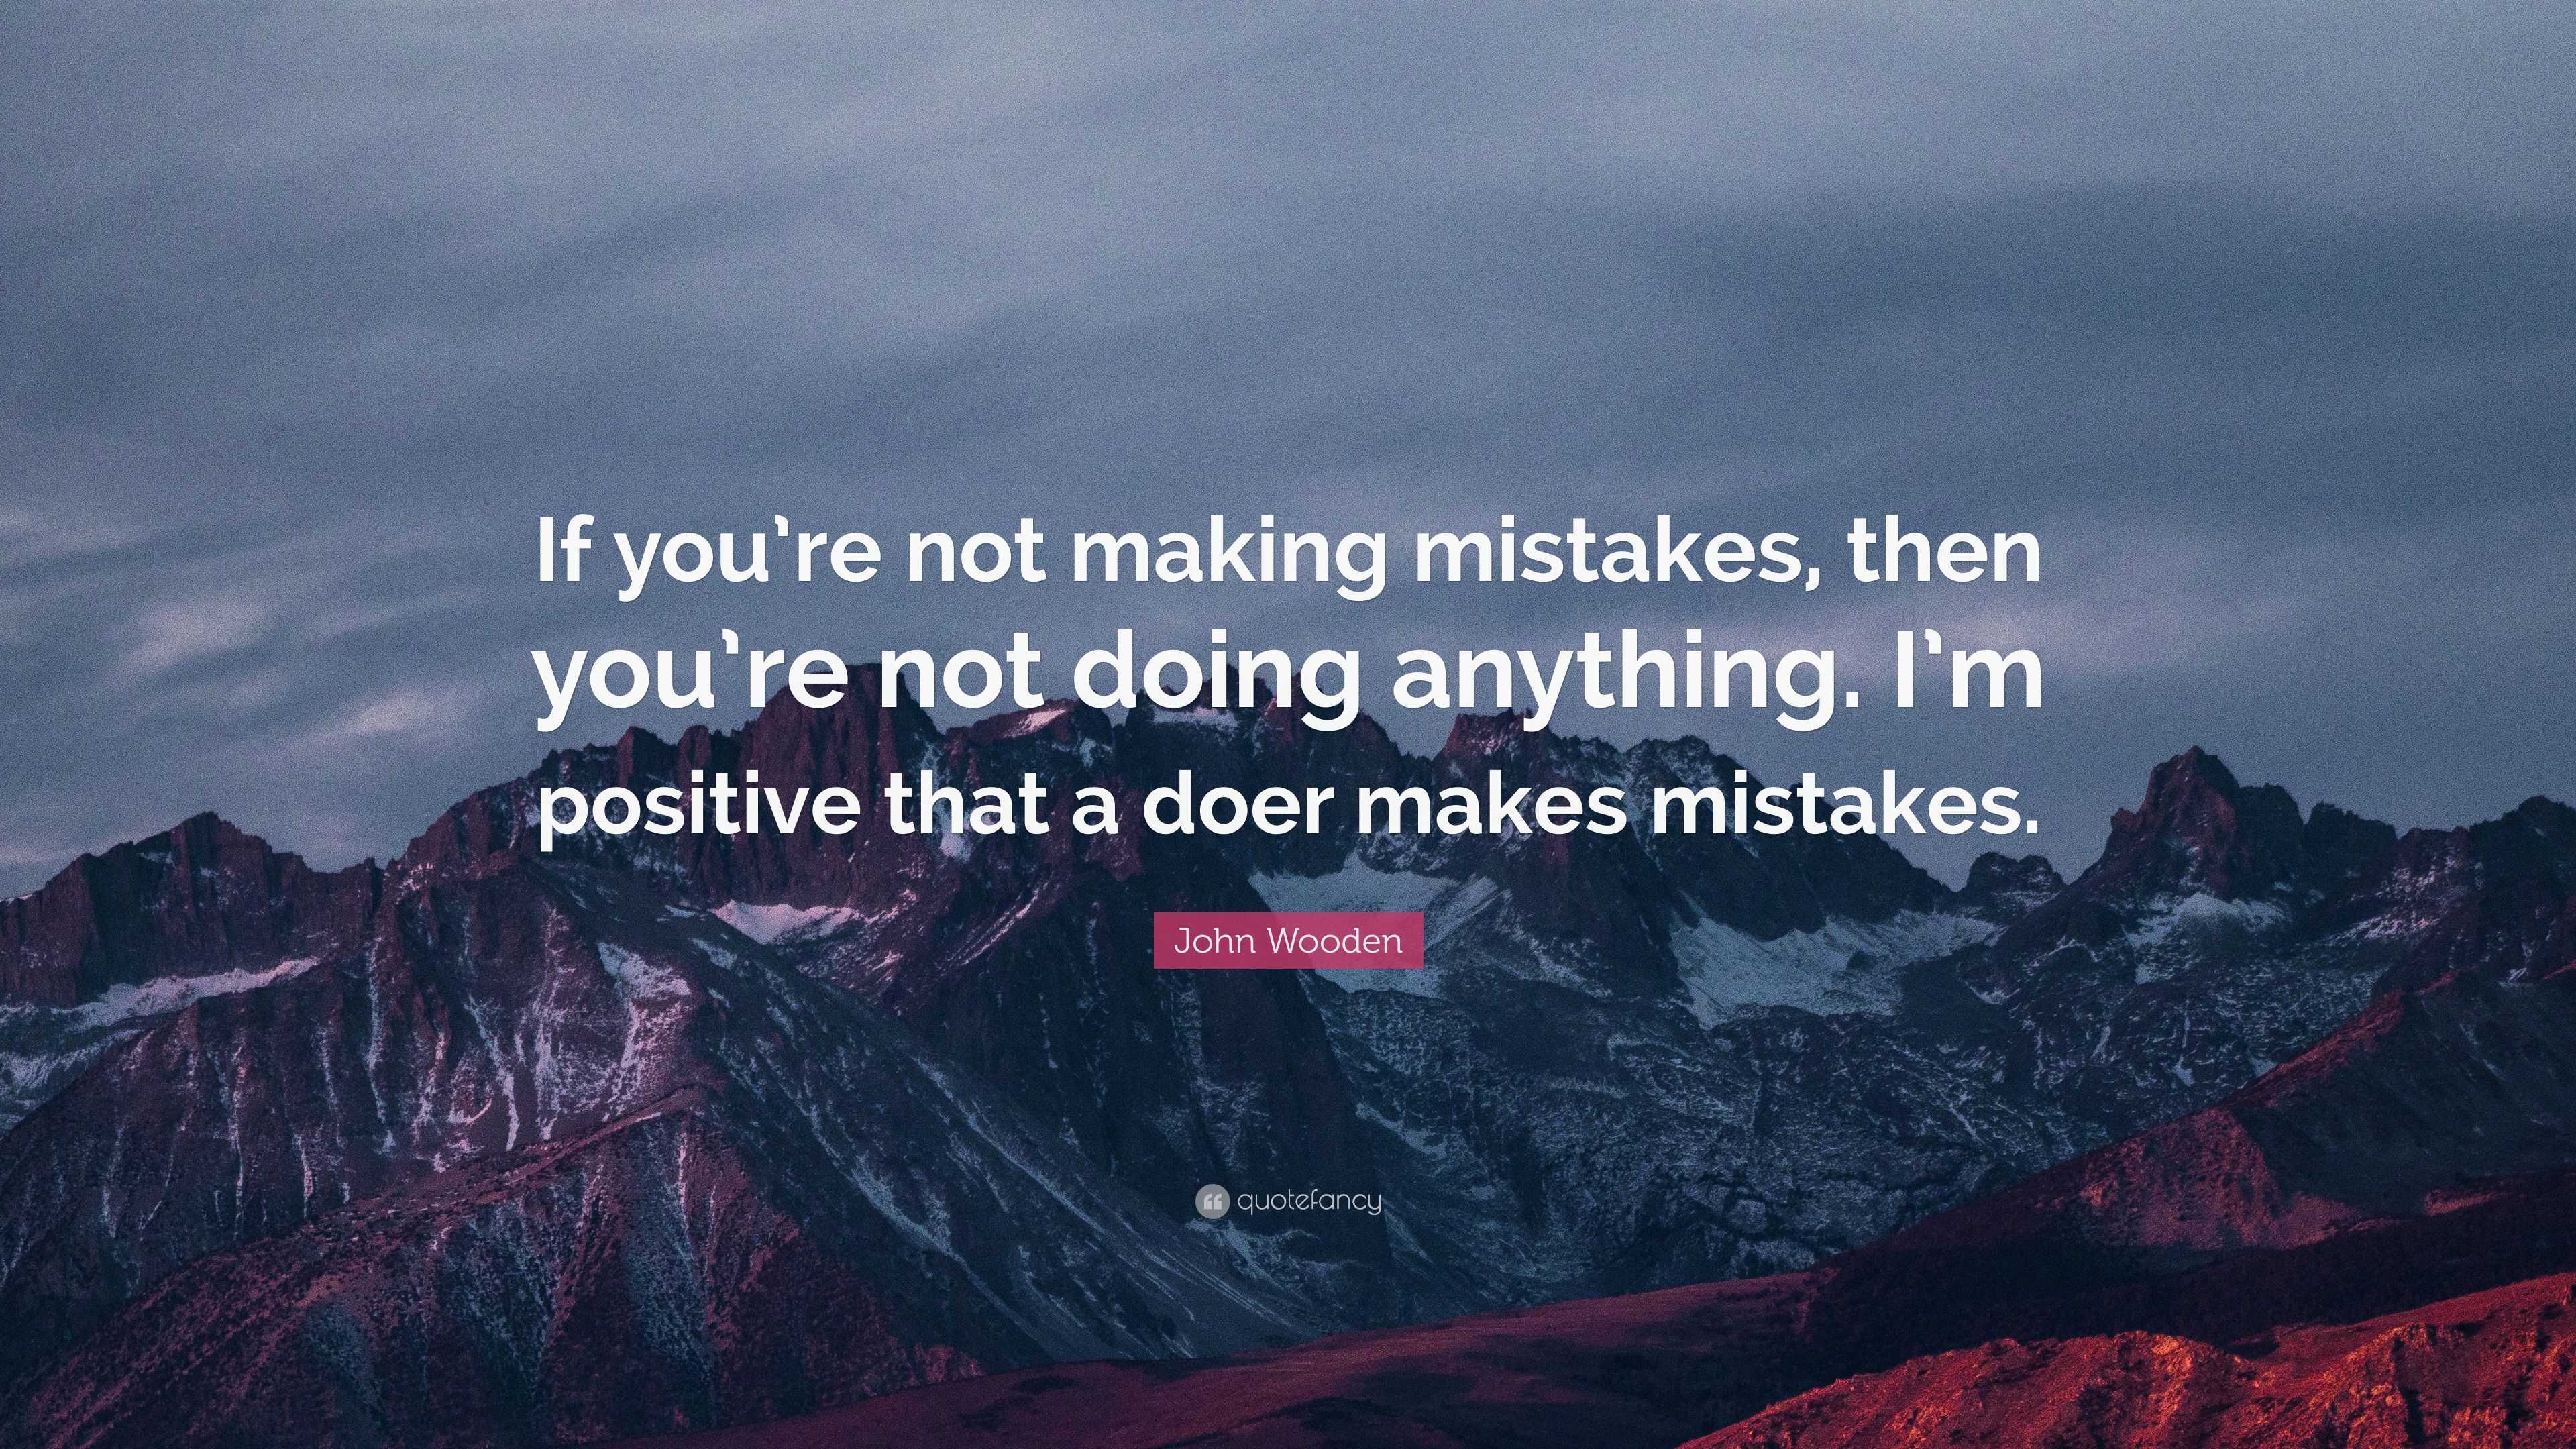 John Wooden Quote: “If you’re not making mistakes, then you’re not